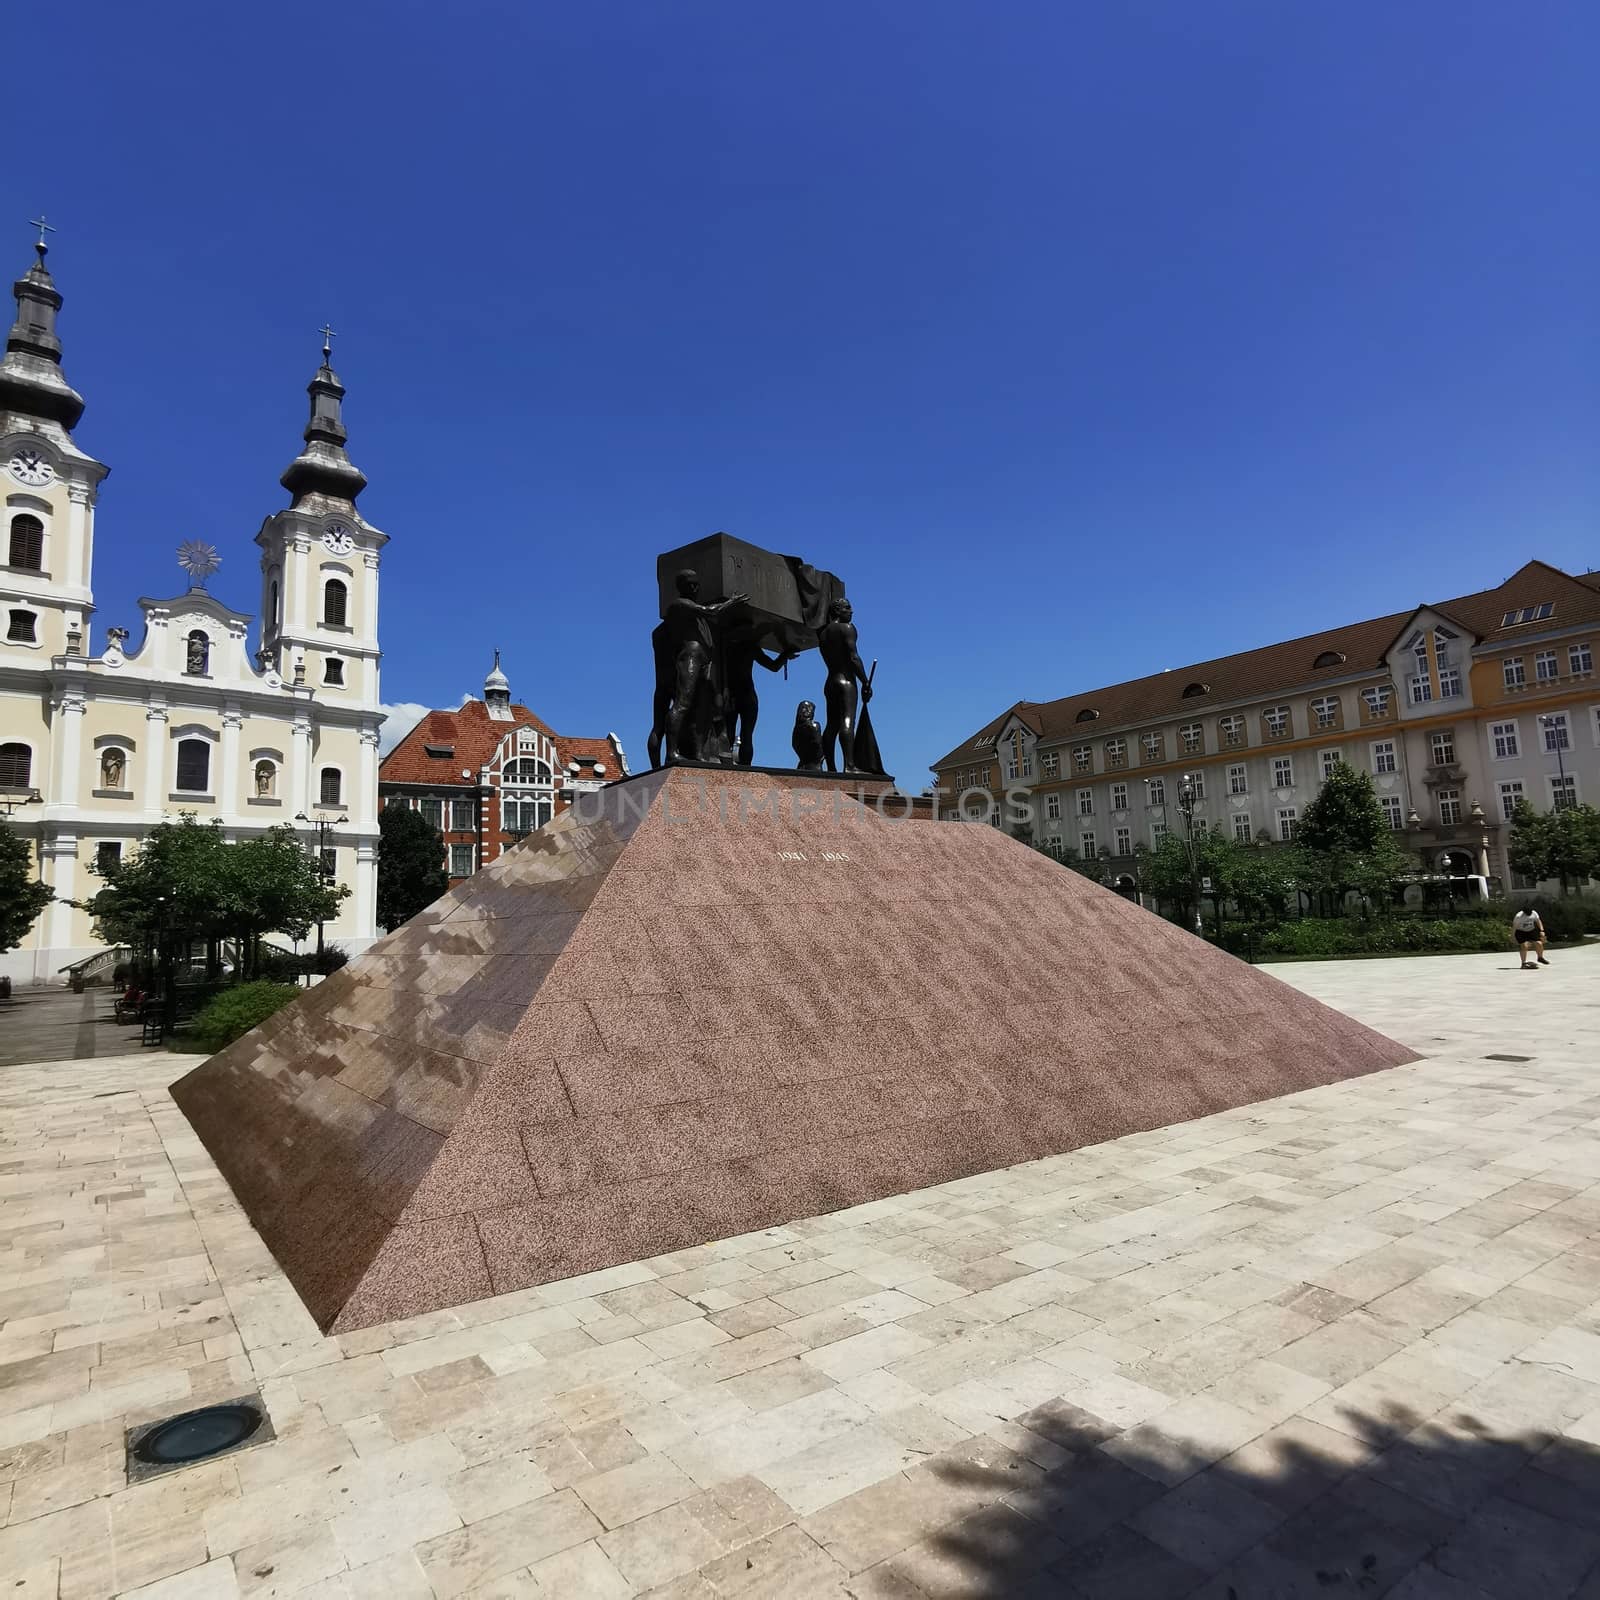 View of the Church of Miskolc and the beautiful statue in the city centre. High quality photo